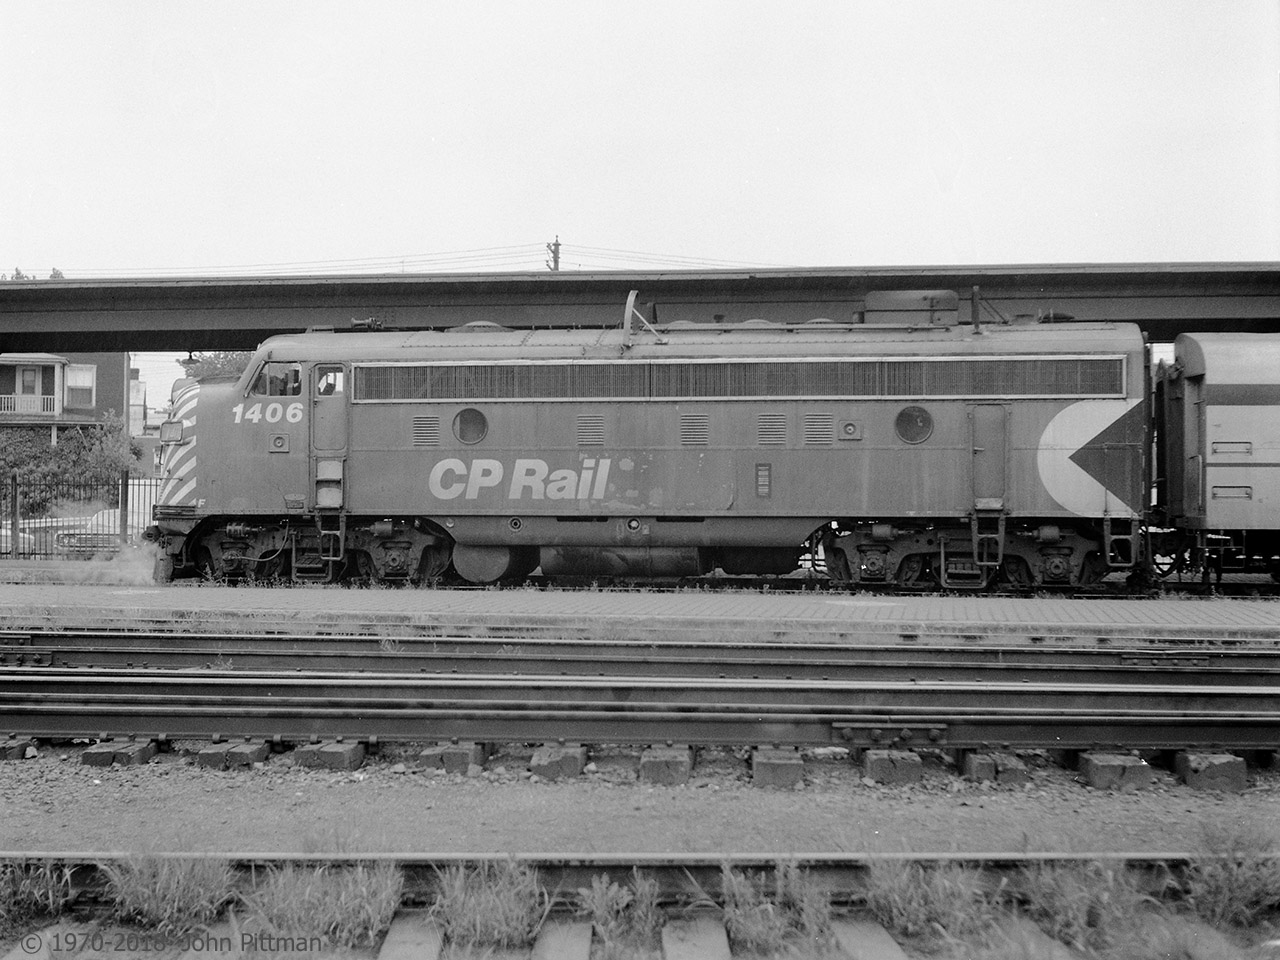 FP9A CP 1406 and train are making a scheduled station stop at Trois-Rivieres QC before continuing to Quebec City.  CP 1406 is equipped with icicle breakers that protect the dome cars of "The Canadian" in tunnels. 
All the passenger trains I ever saw in T-R were hauled by one EMD or GMDD locomotive.
Most frequently seen on passenger trains here in 1970-71 were CP's remaining E8A units, 1800 or 1802. (I wondered about CP 1801, but it had been scrapped after a crash in late December 1968.)
Second most common were CP 406x series FP7A units in maroon and grey. CP Rail red passenger engines were least often encountered on my intermittent visits to the station. 
By around mid-year in 1971 all the passenger trains I saw in T-R were sets of Budd RDC's.